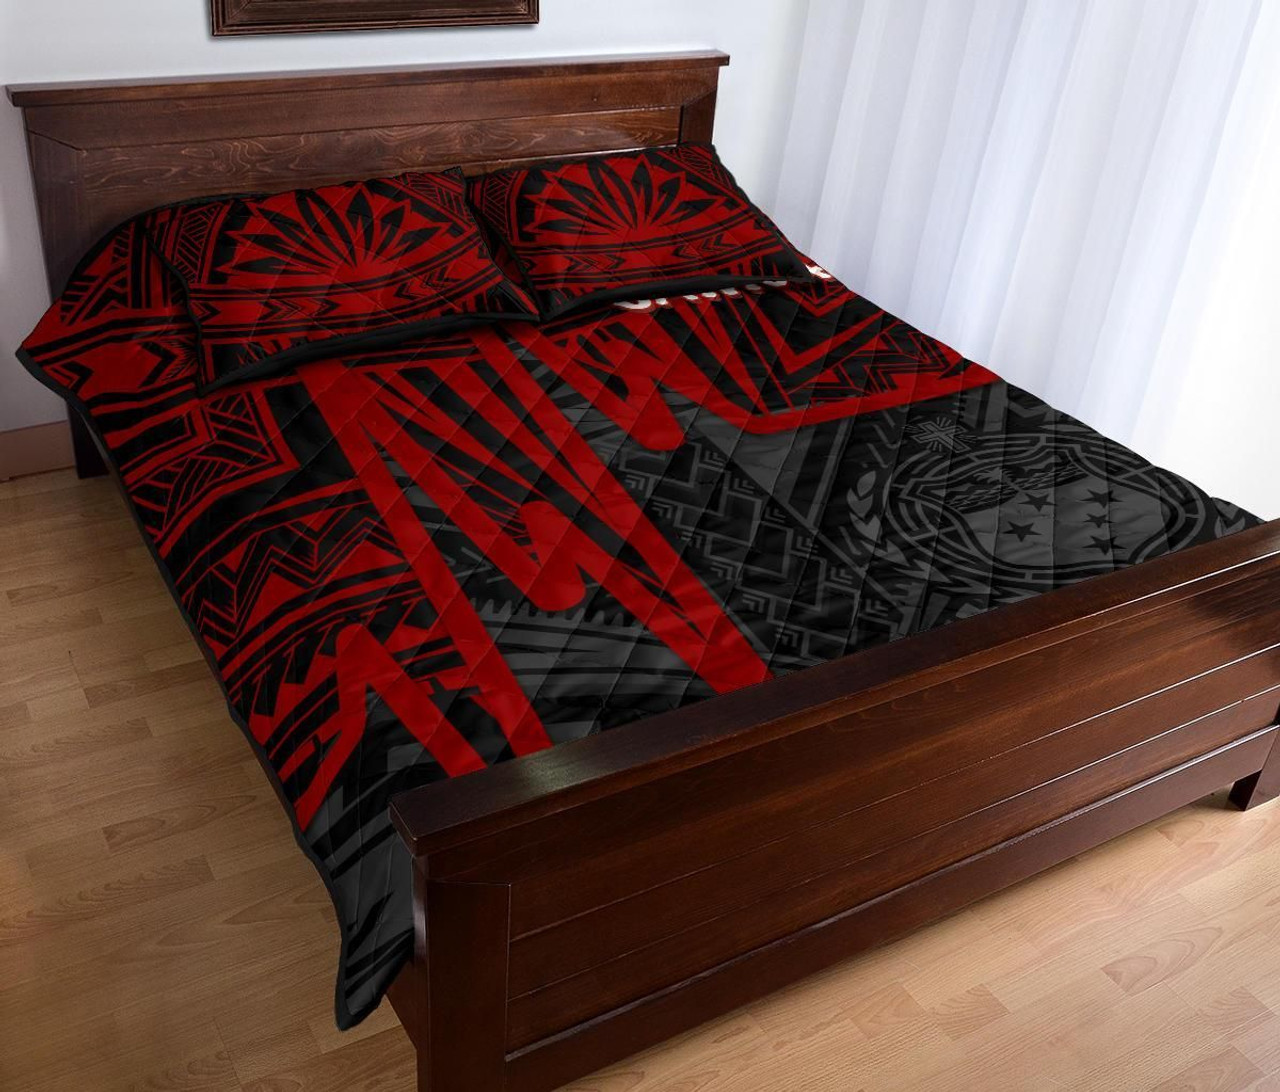 Samoa Quilt Bed Set - Samoa Seal With Polynesian Pattern In Heartbeat Style (Red) 3